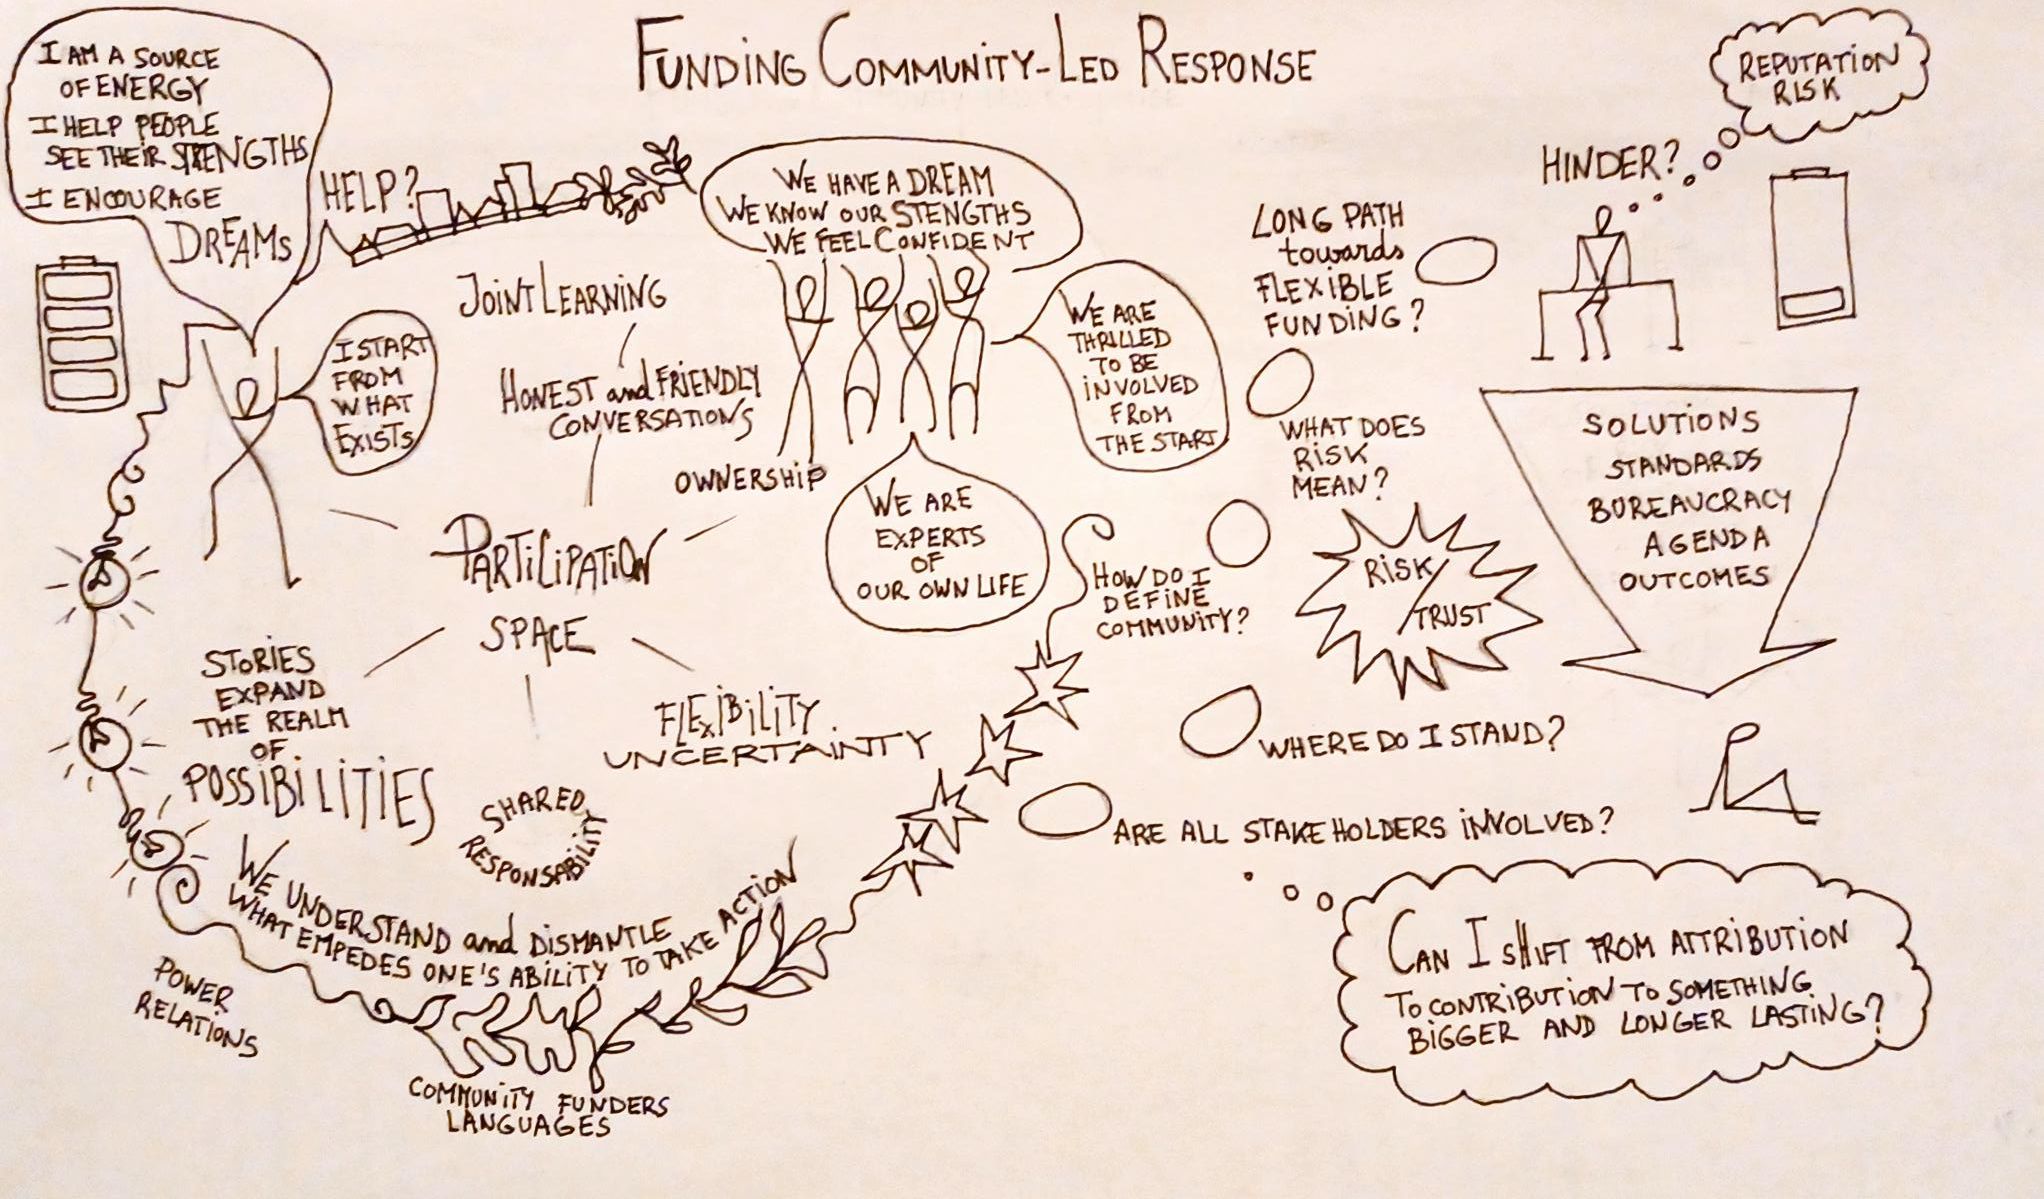 Visual summary of the conversation about funding community-led responses